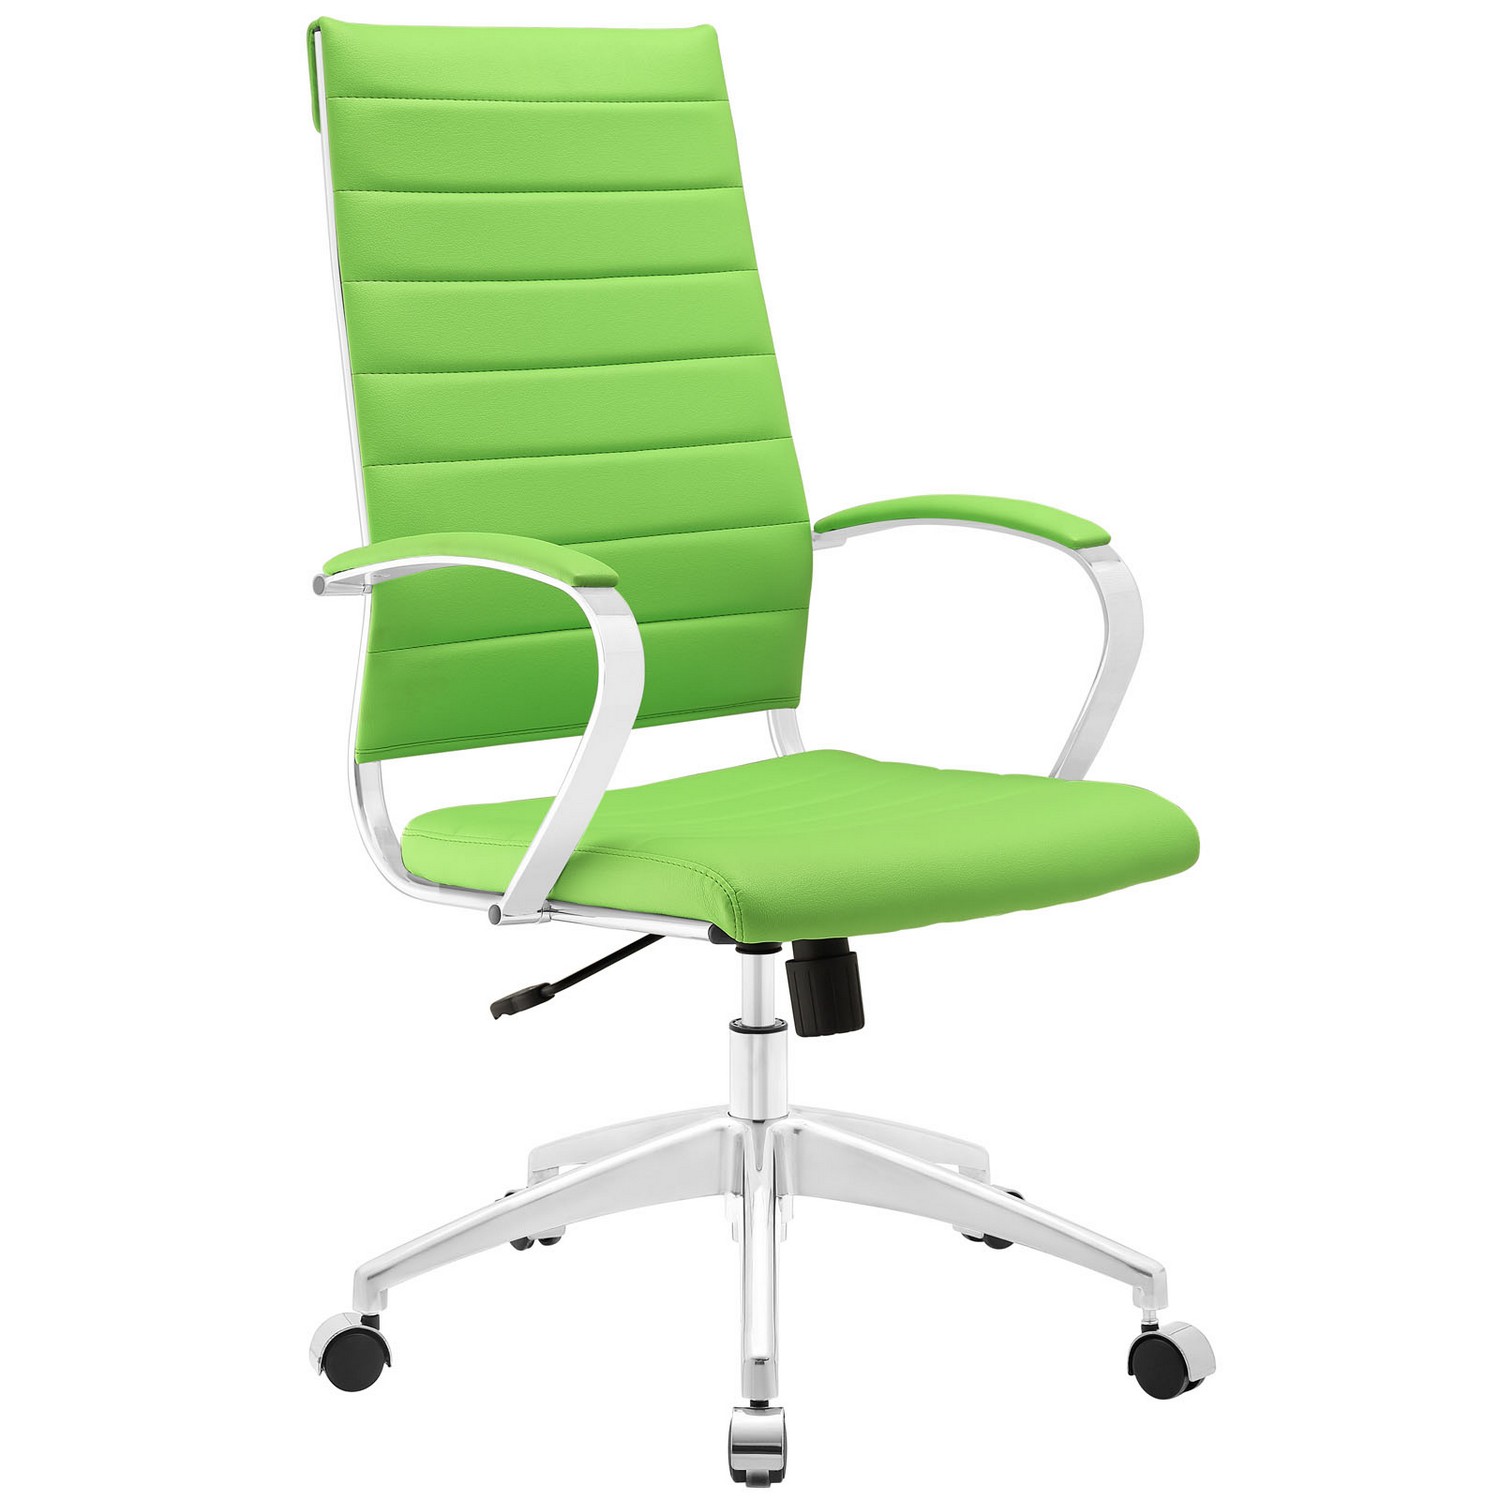 Modway Jive Highback Office Chair - Bright Green